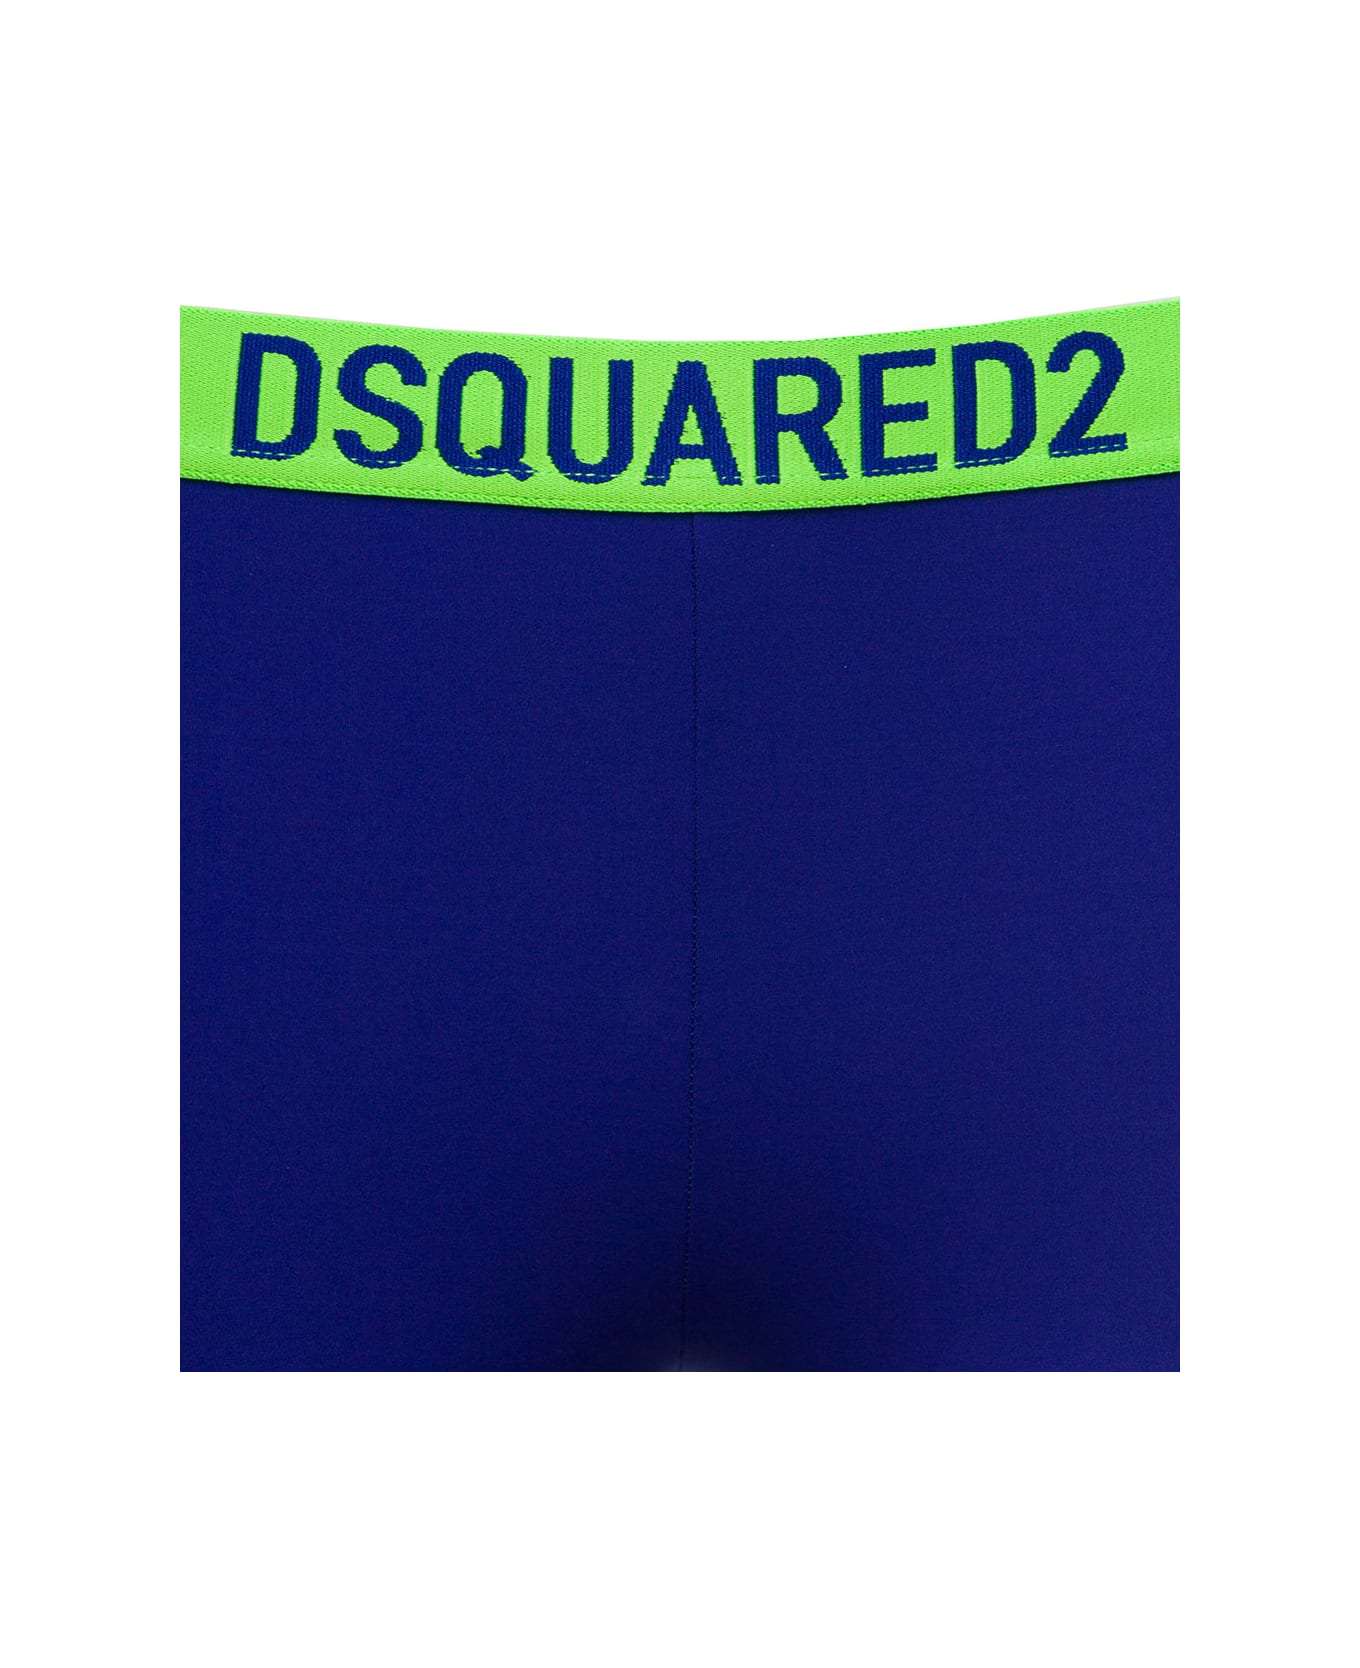 Dsquared2 Blue And Bright Green Biker Shorts With Logo Waistband In Stretch Polyamide Woman D-sqaured2 - Blu ショーツ